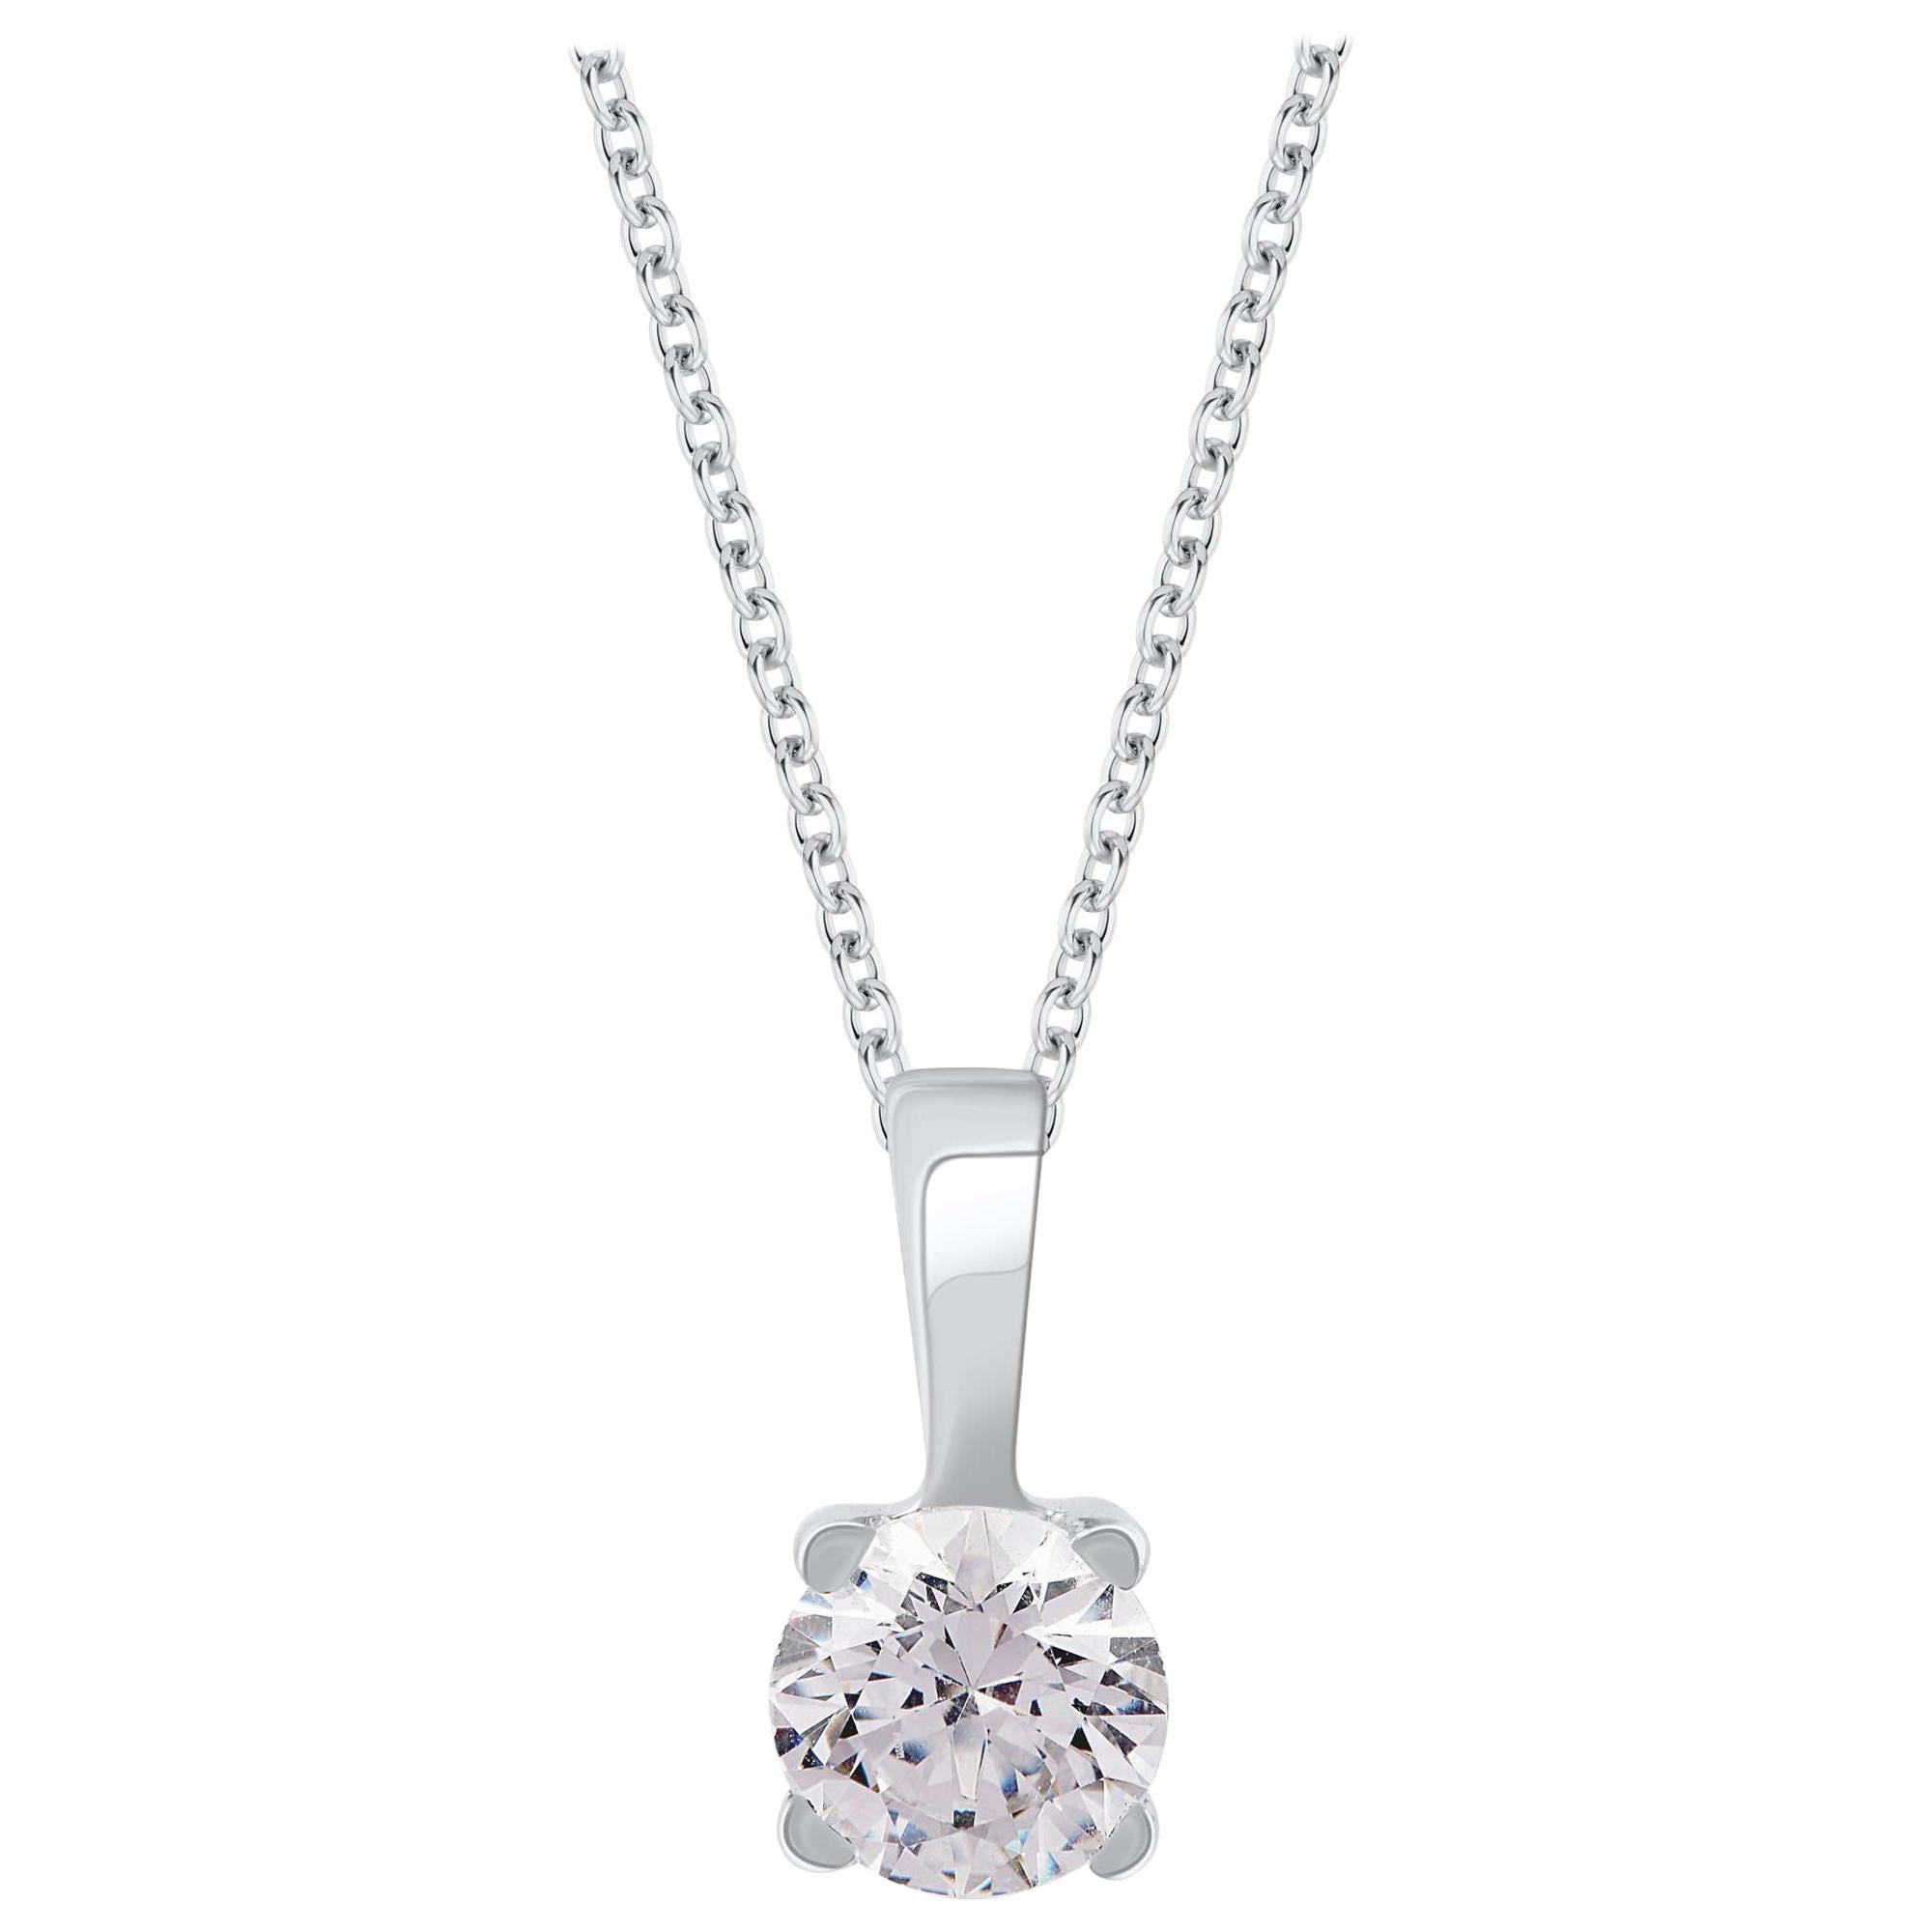 TJD 1.00 Carat Diamond 18 Karat White Gold Solitaire Pendant with 18 inch chain For Sale